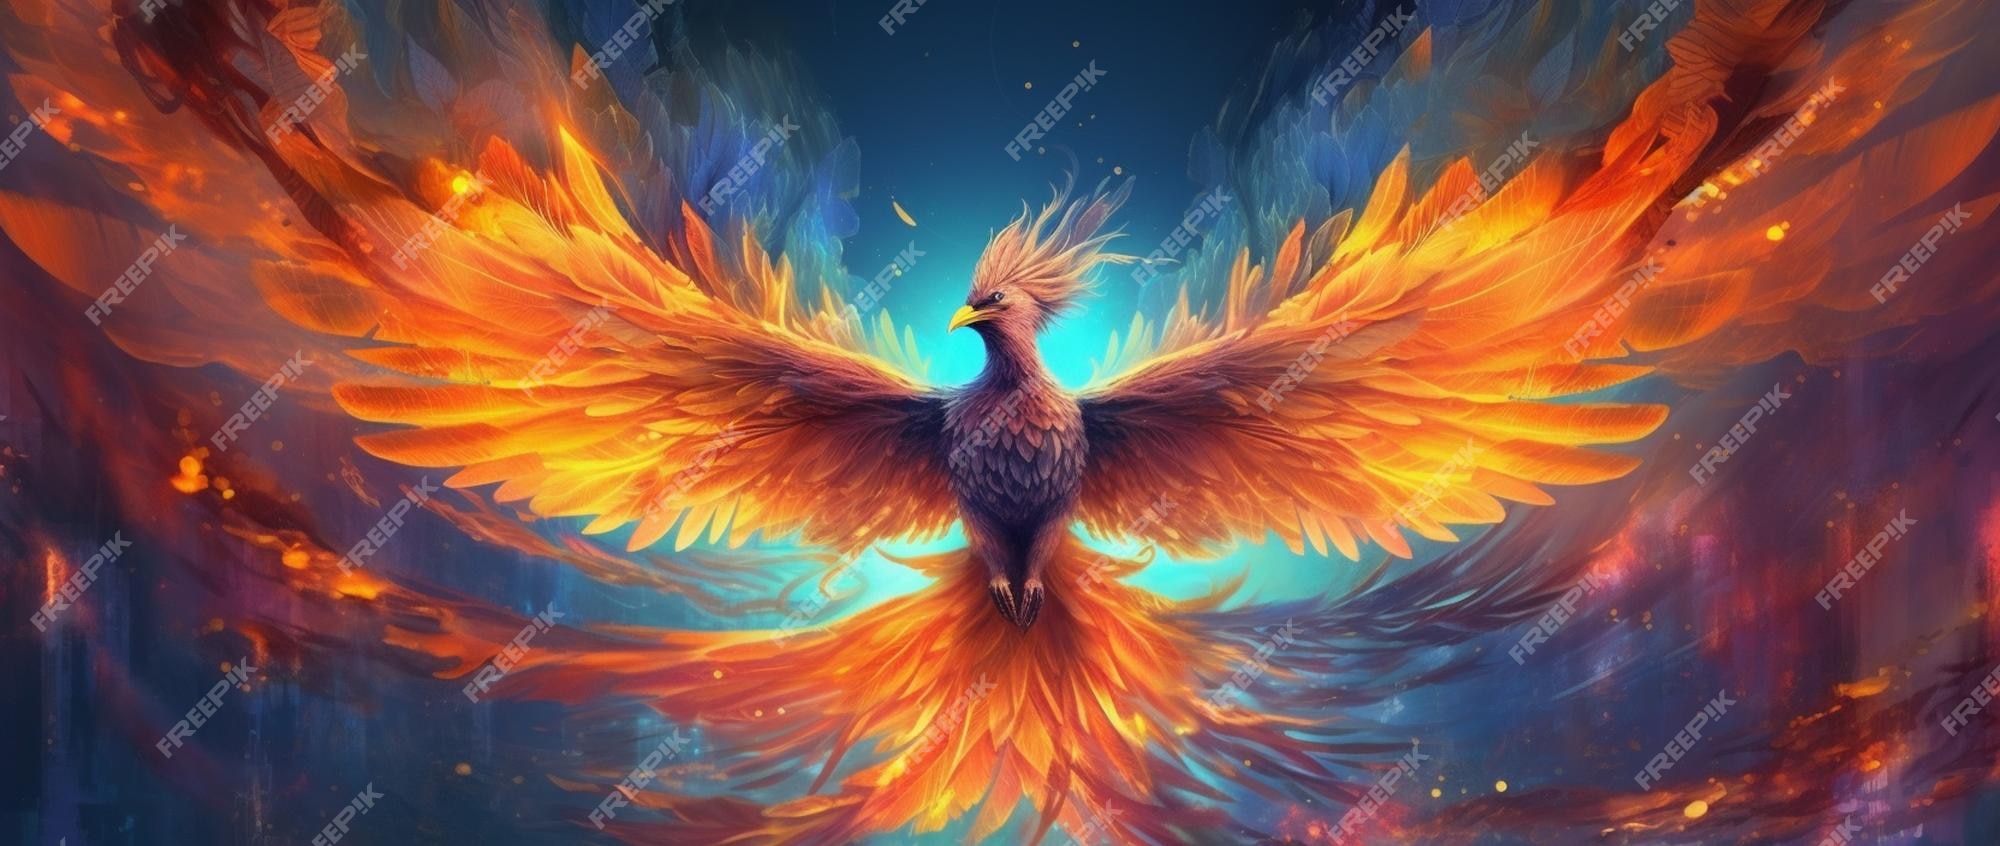 Premium Photo | A phoenix bird with wings spread and the word ...